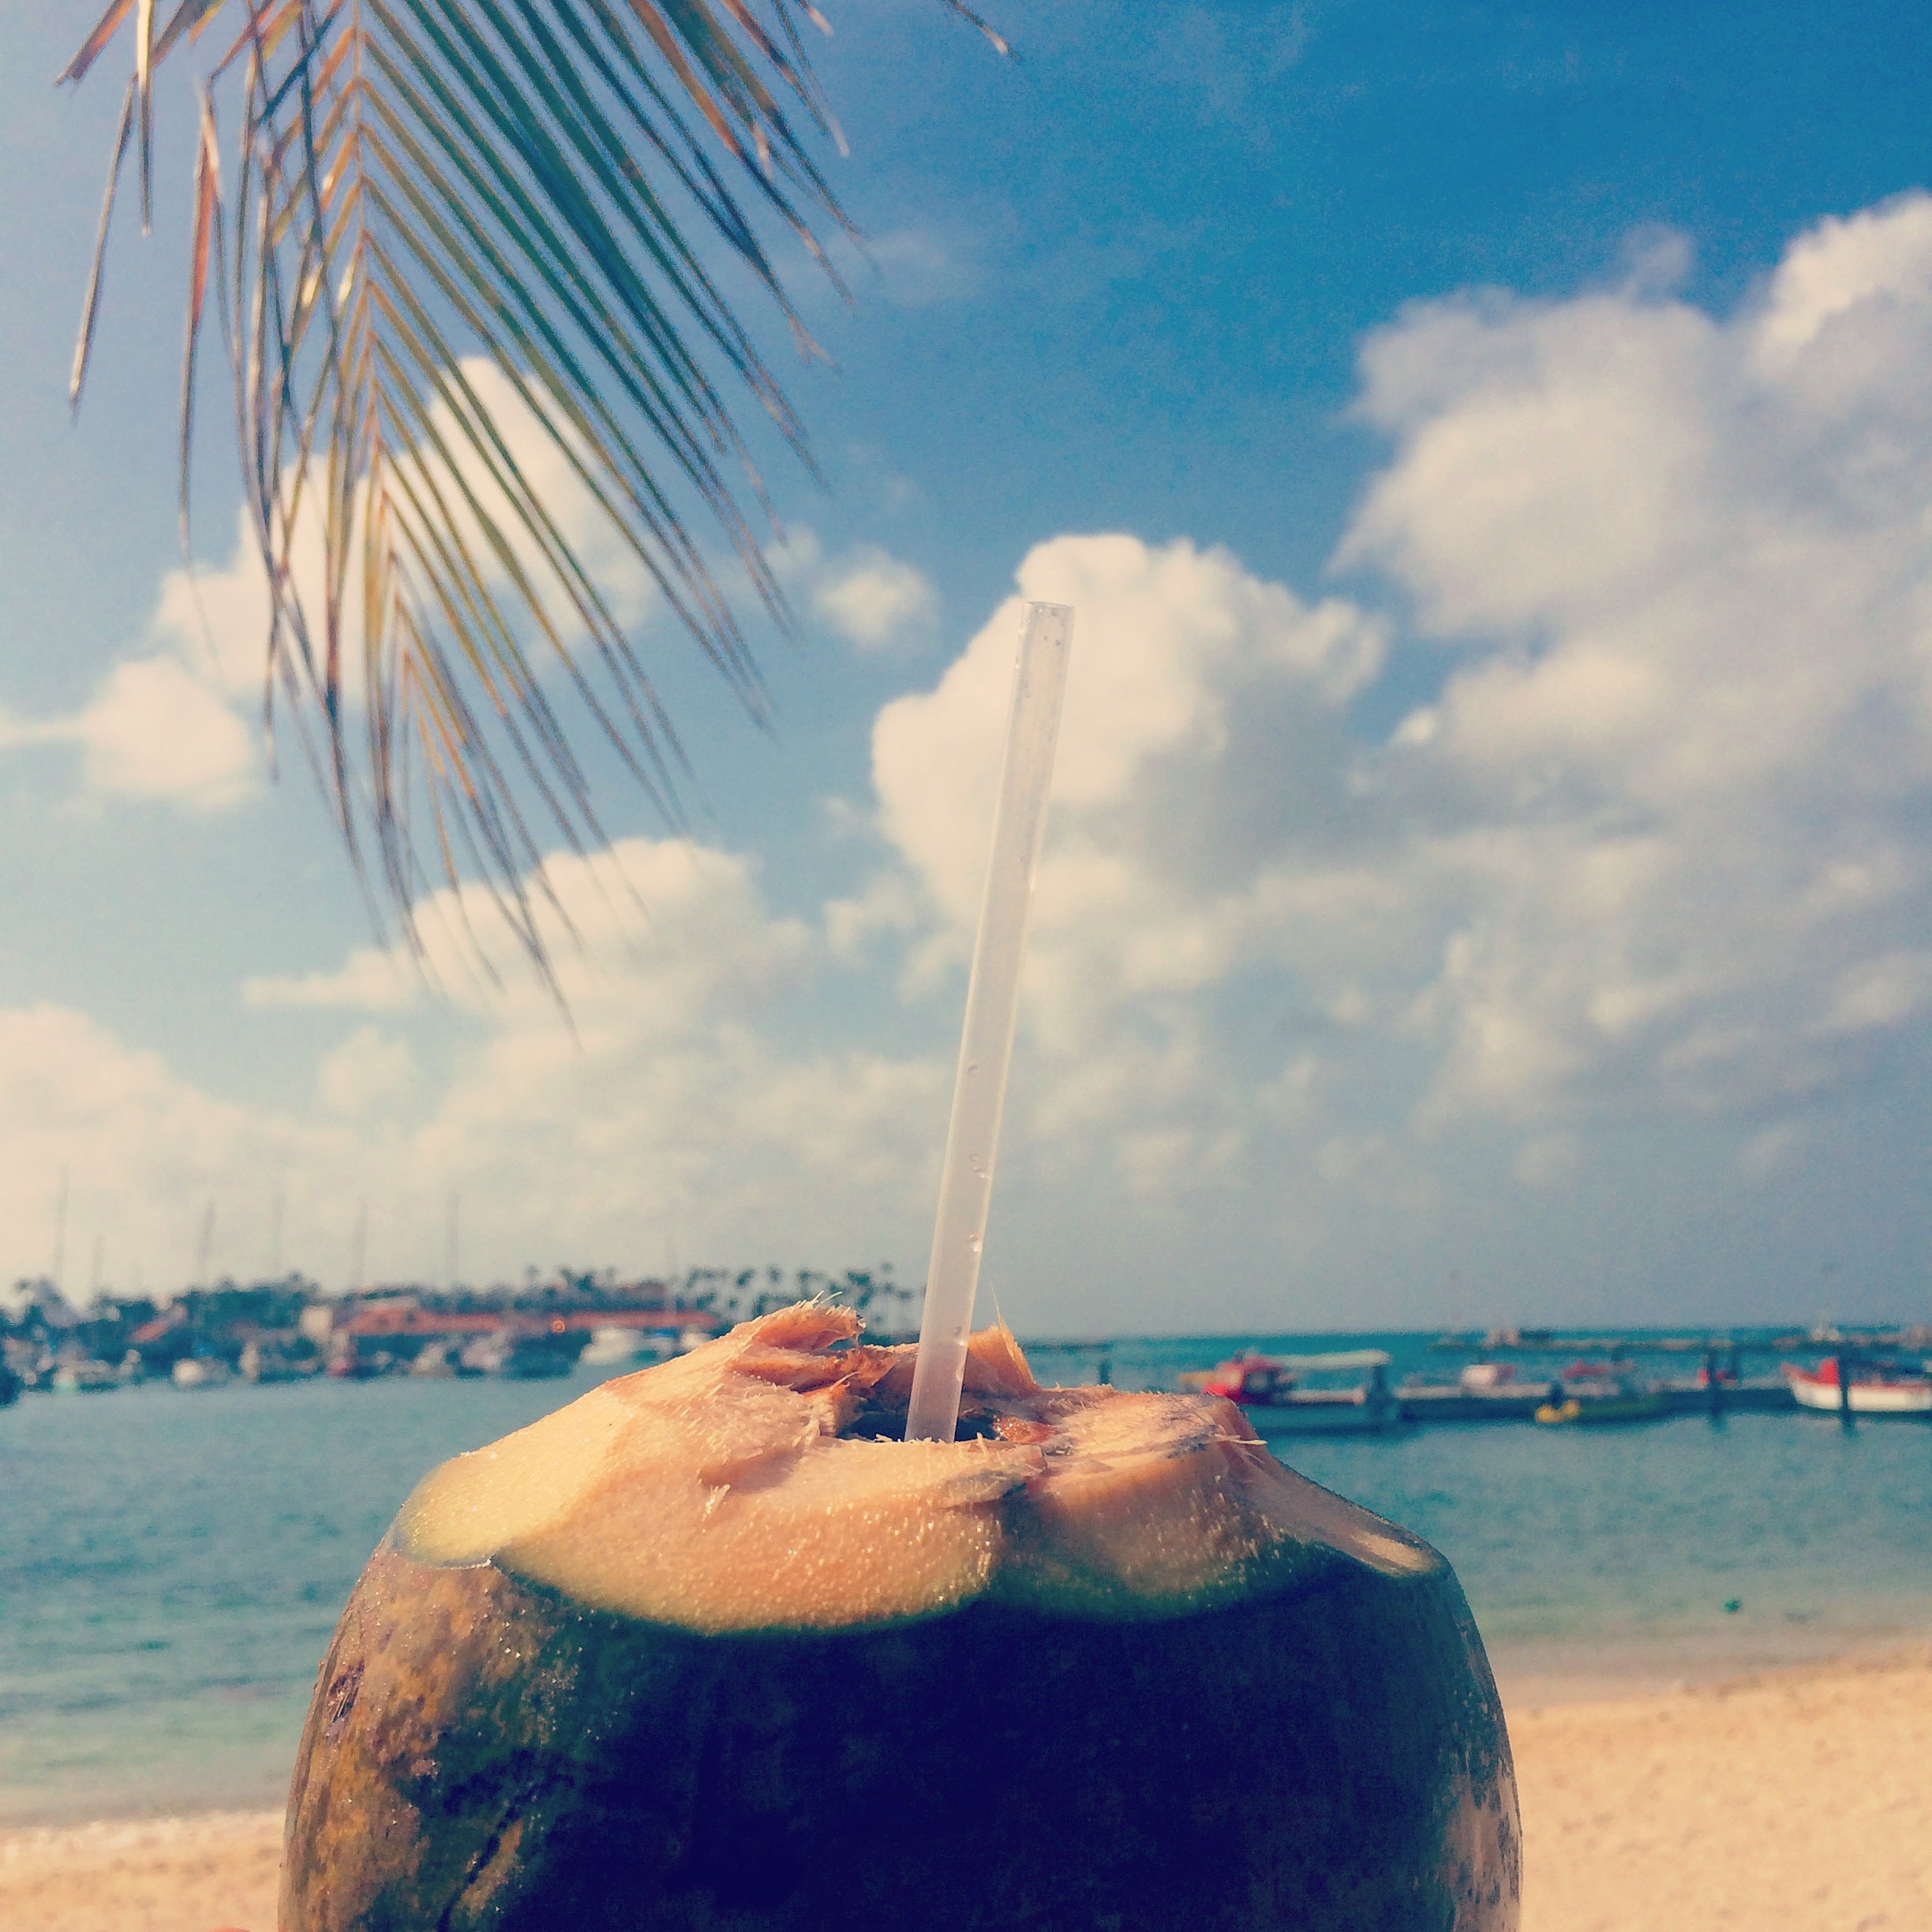 Coconuts Aruba by KARMA for a cure